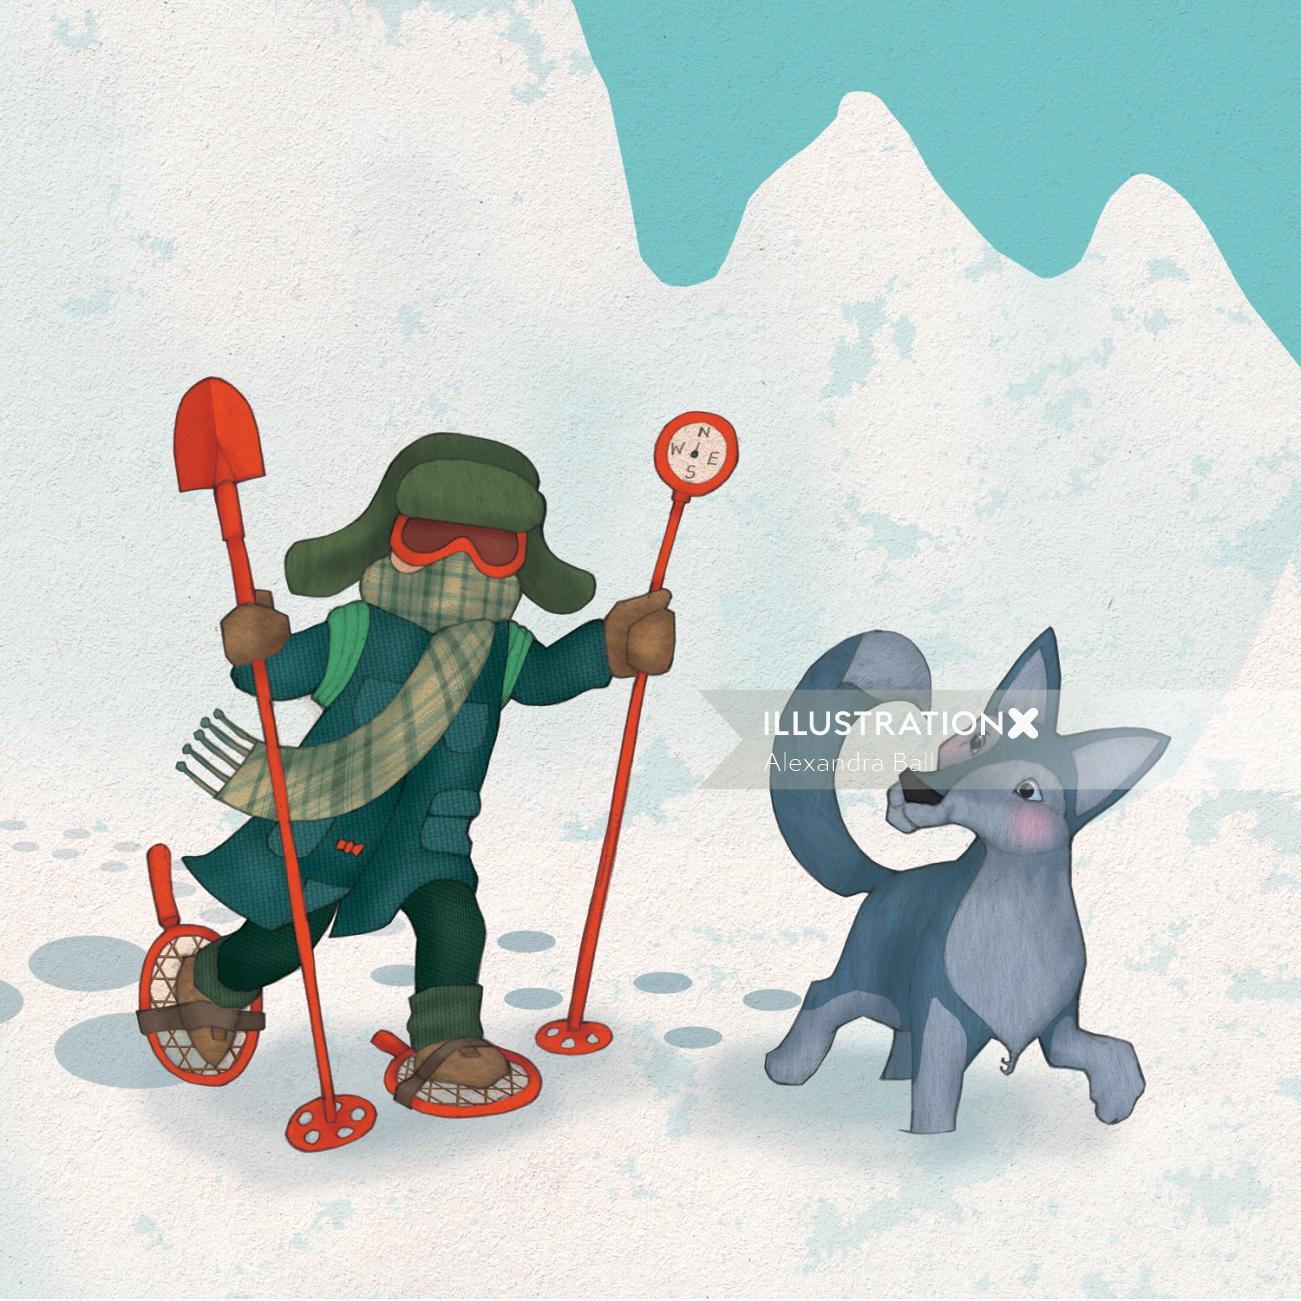 A Kid and dog playing in snow illustration